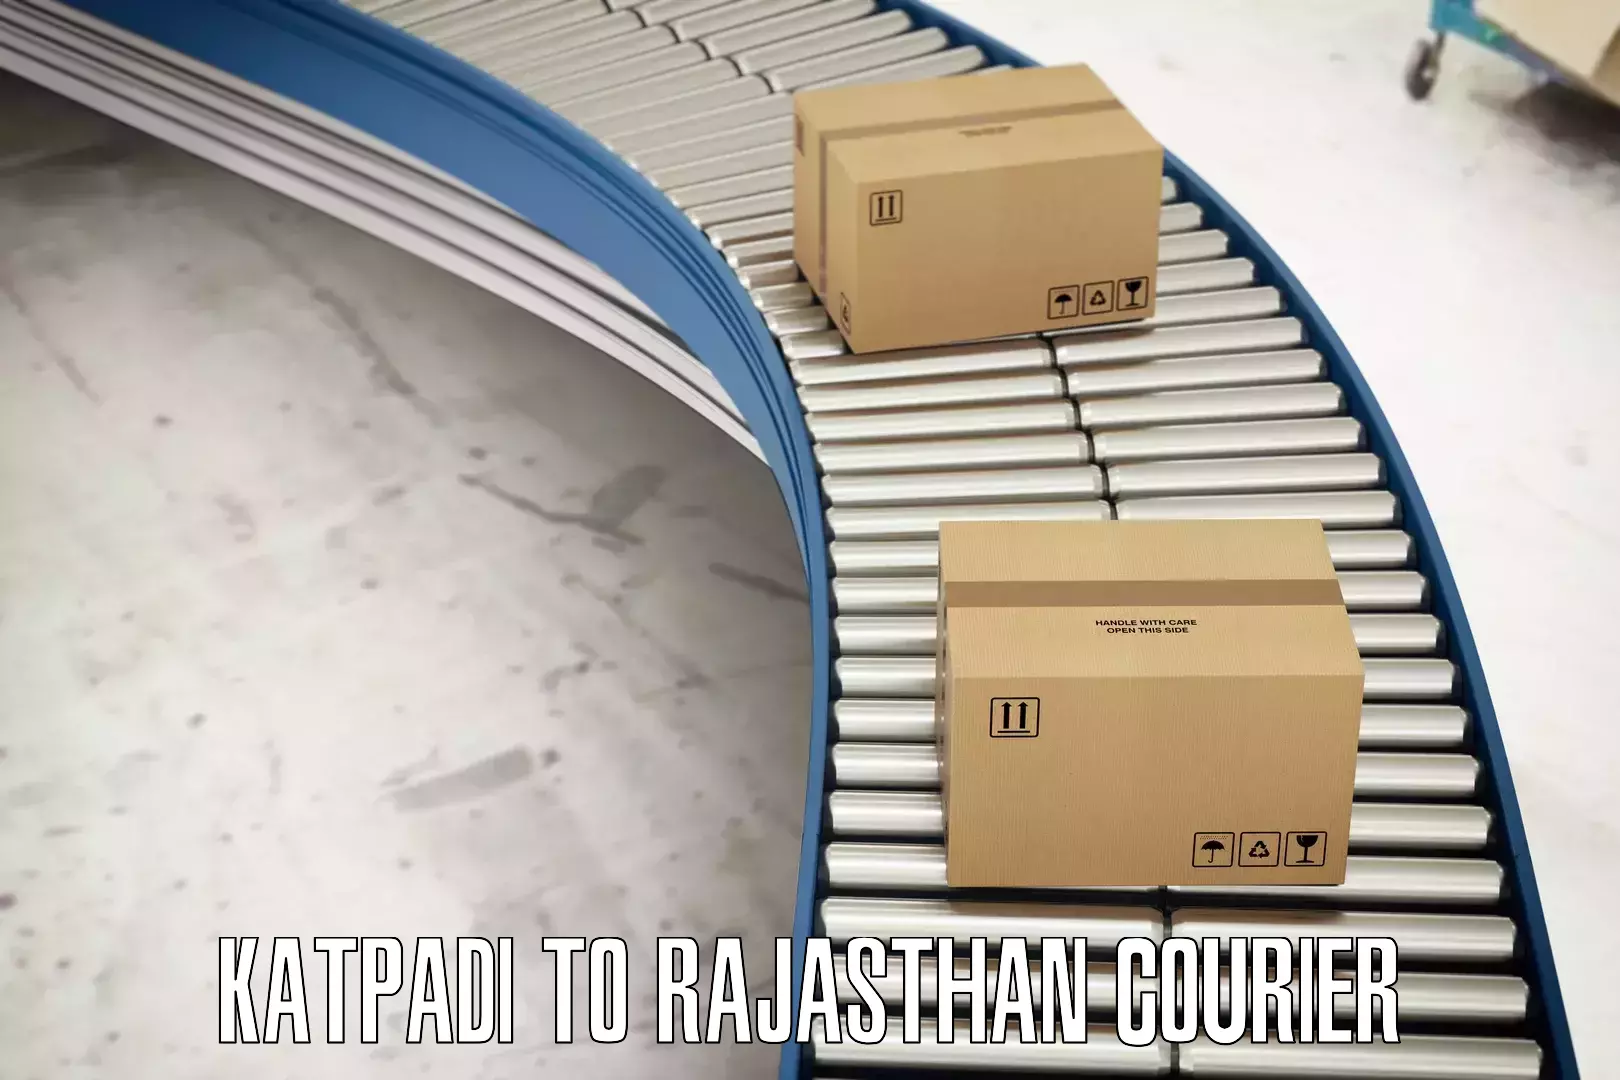 Personal parcel delivery Katpadi to Rajasthan